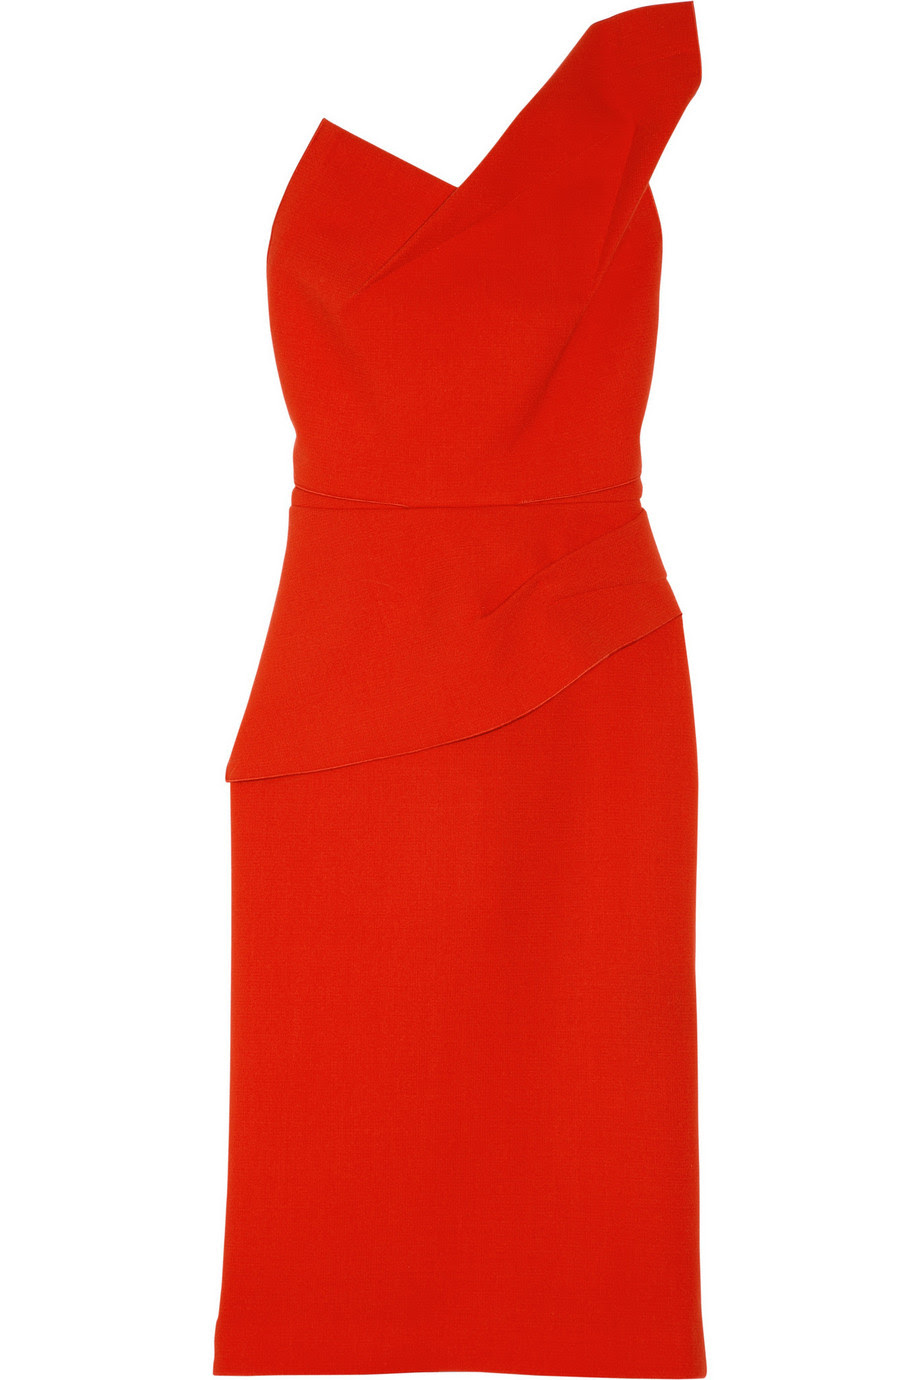 DIARY OF A CLOTHESHORSE: 6 OF THE BEST FROM ROLAND MOURET AW 13/14